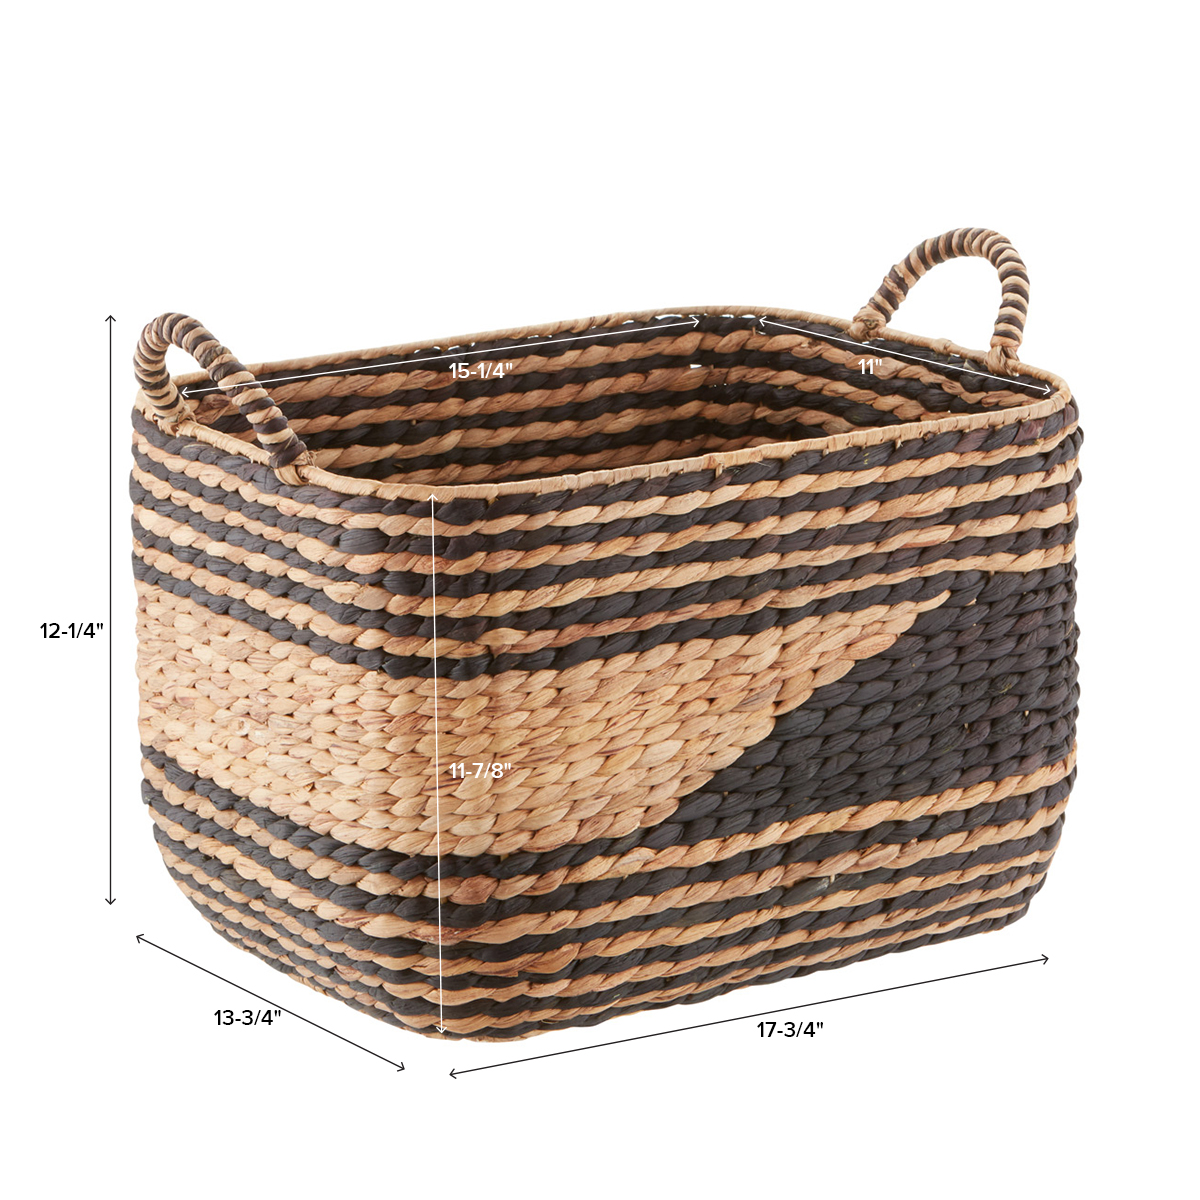 https://www.containerstore.com/catalogimages/411808/10074313-water-hayacinth-basket-with.jpg